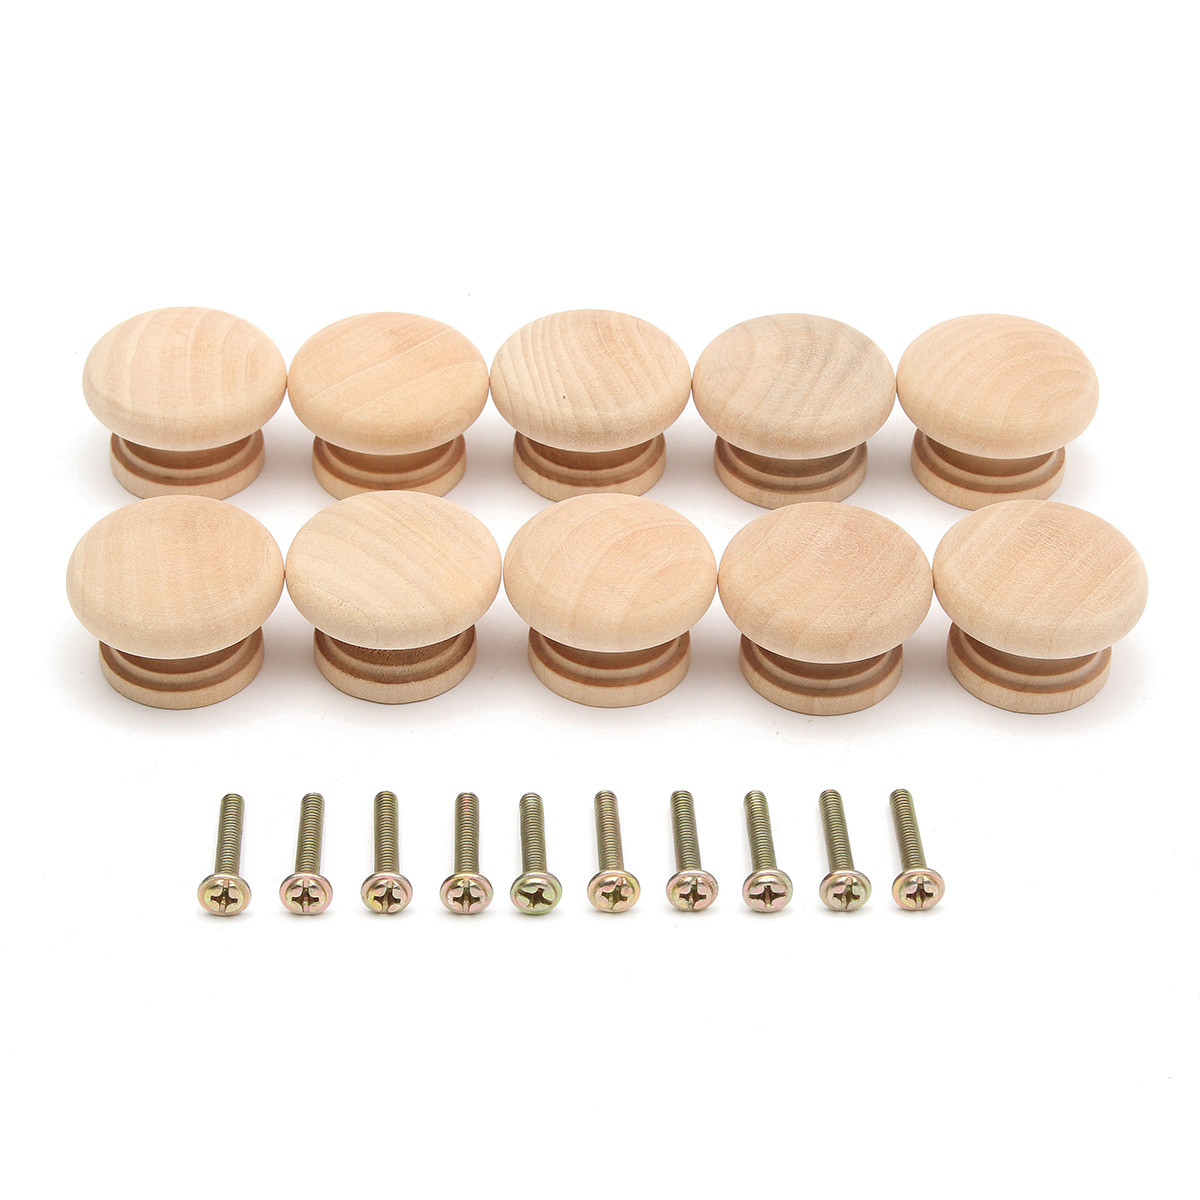 

10Pcs Wooden Pull Knob Mushroom Shape for Drawer Cabinet with Screws